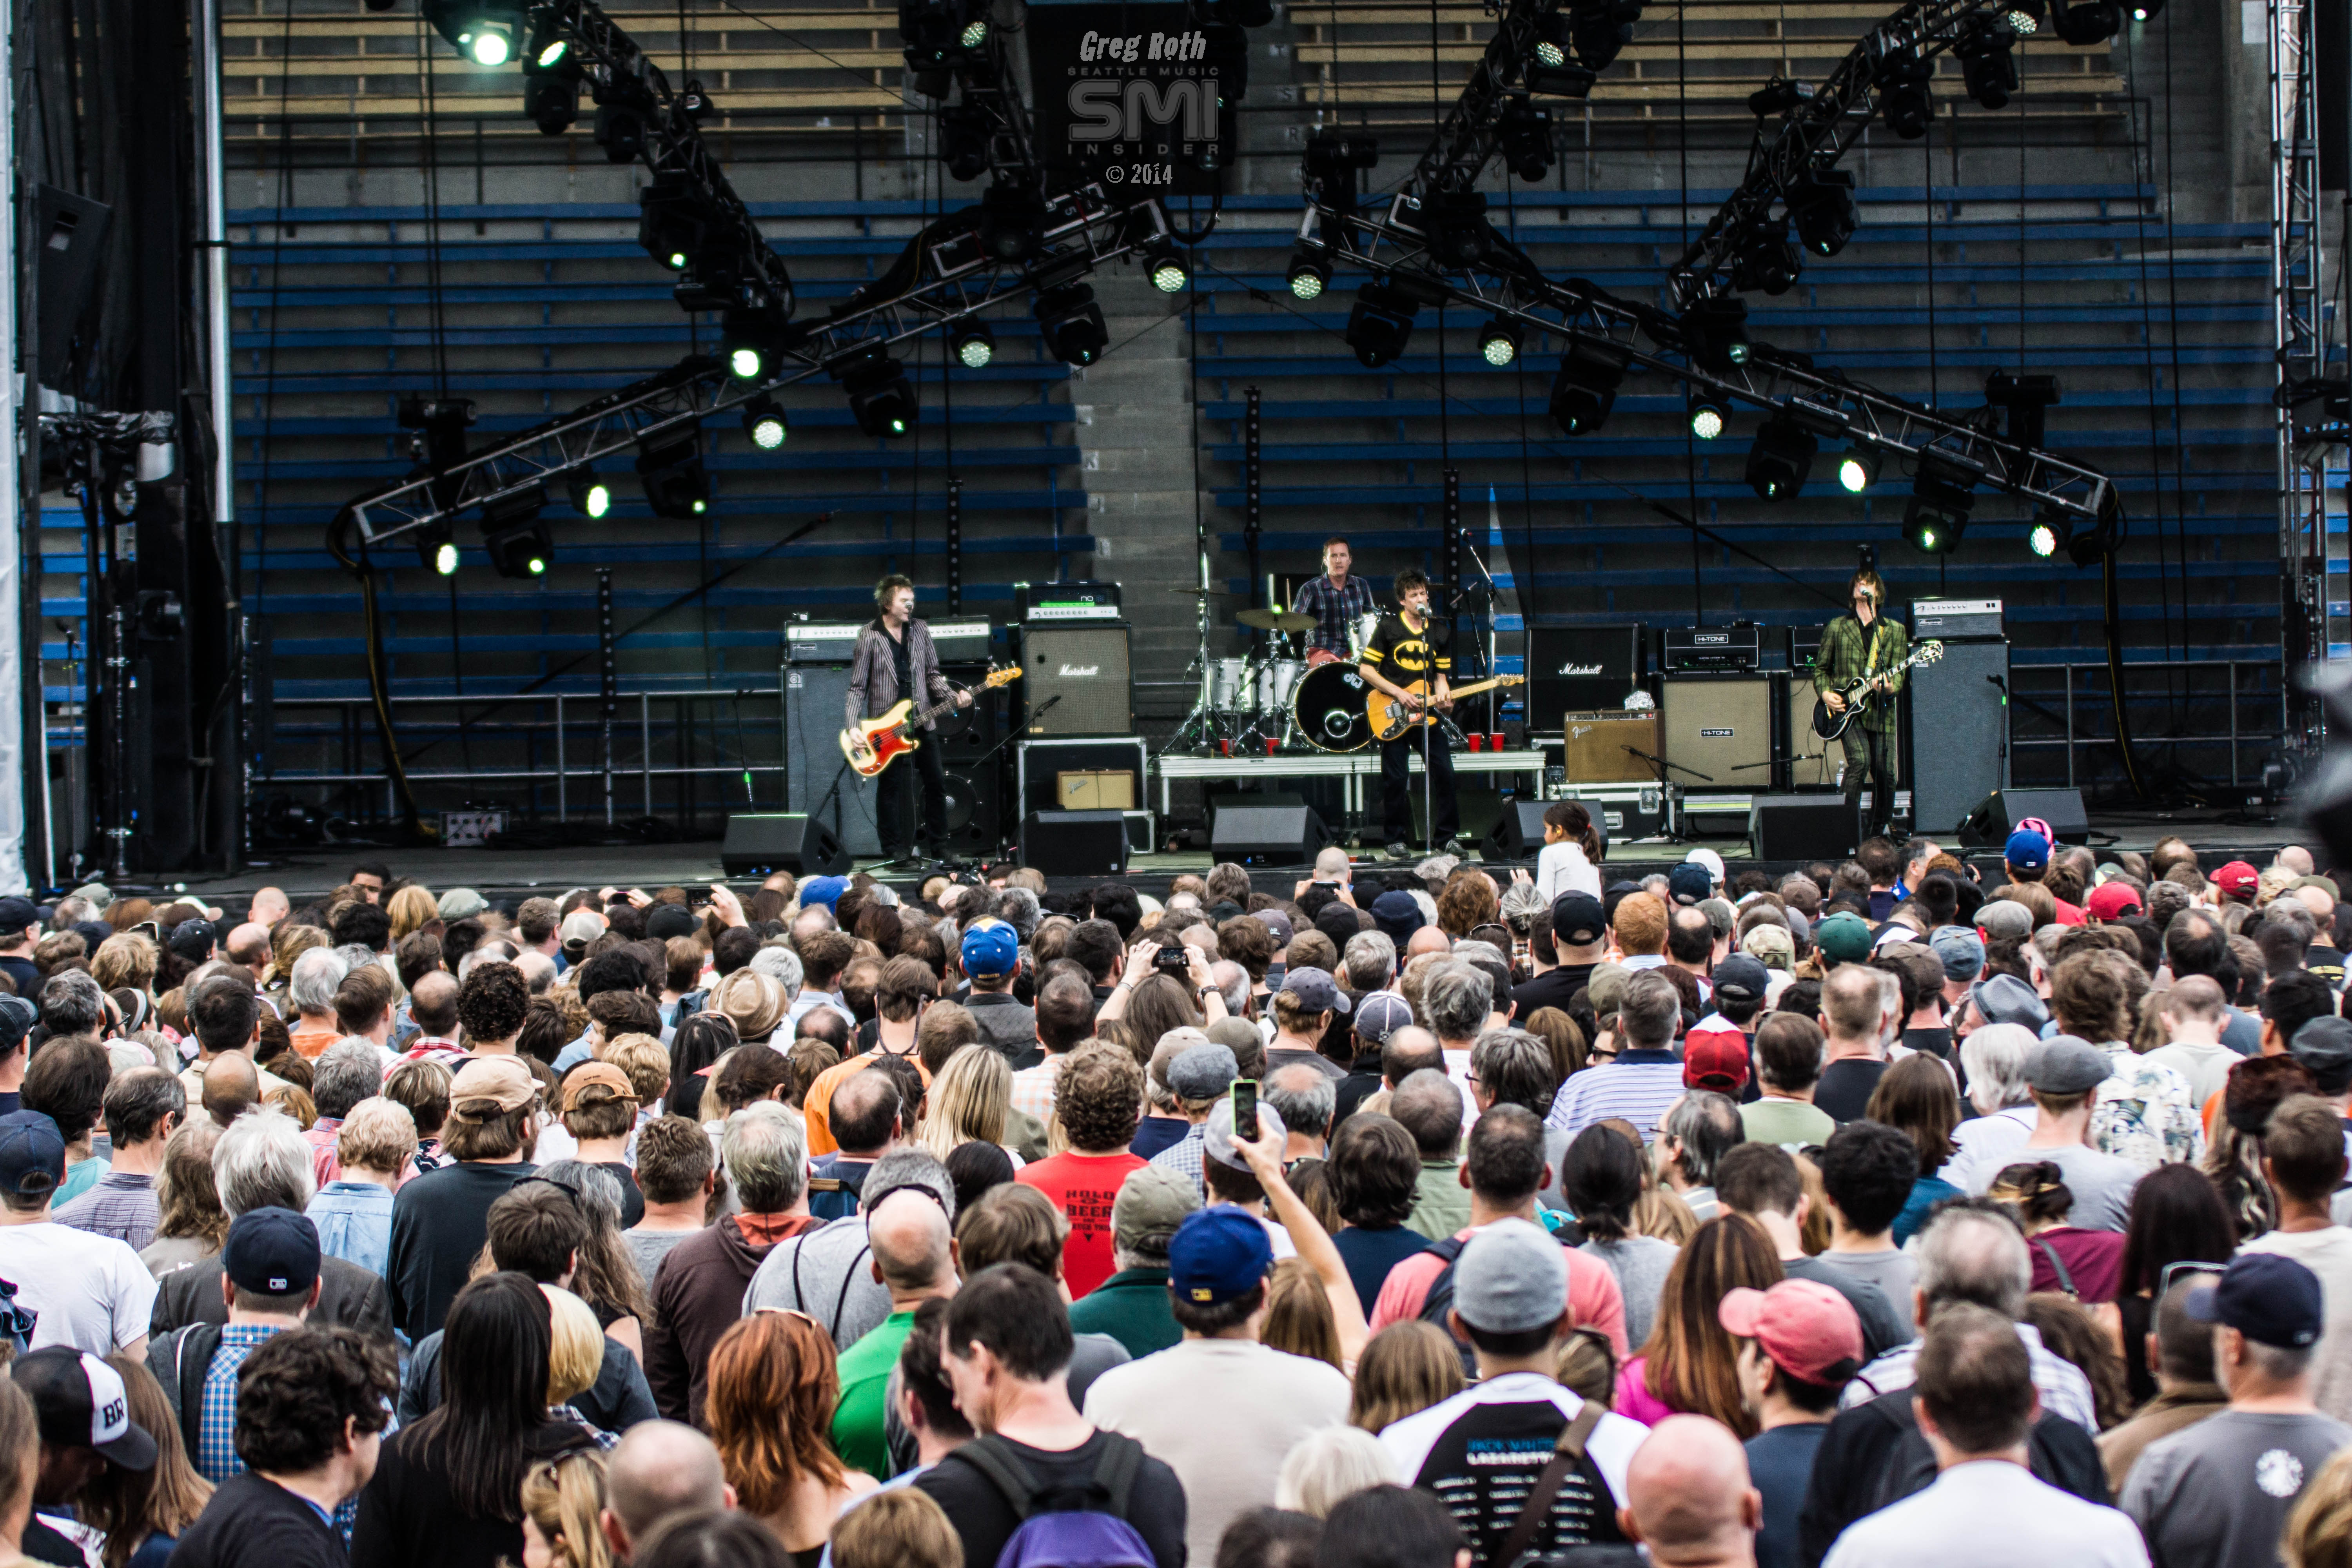 The Replacements Live @ Bumbershoot 2014 (Photo by Greg Roth)